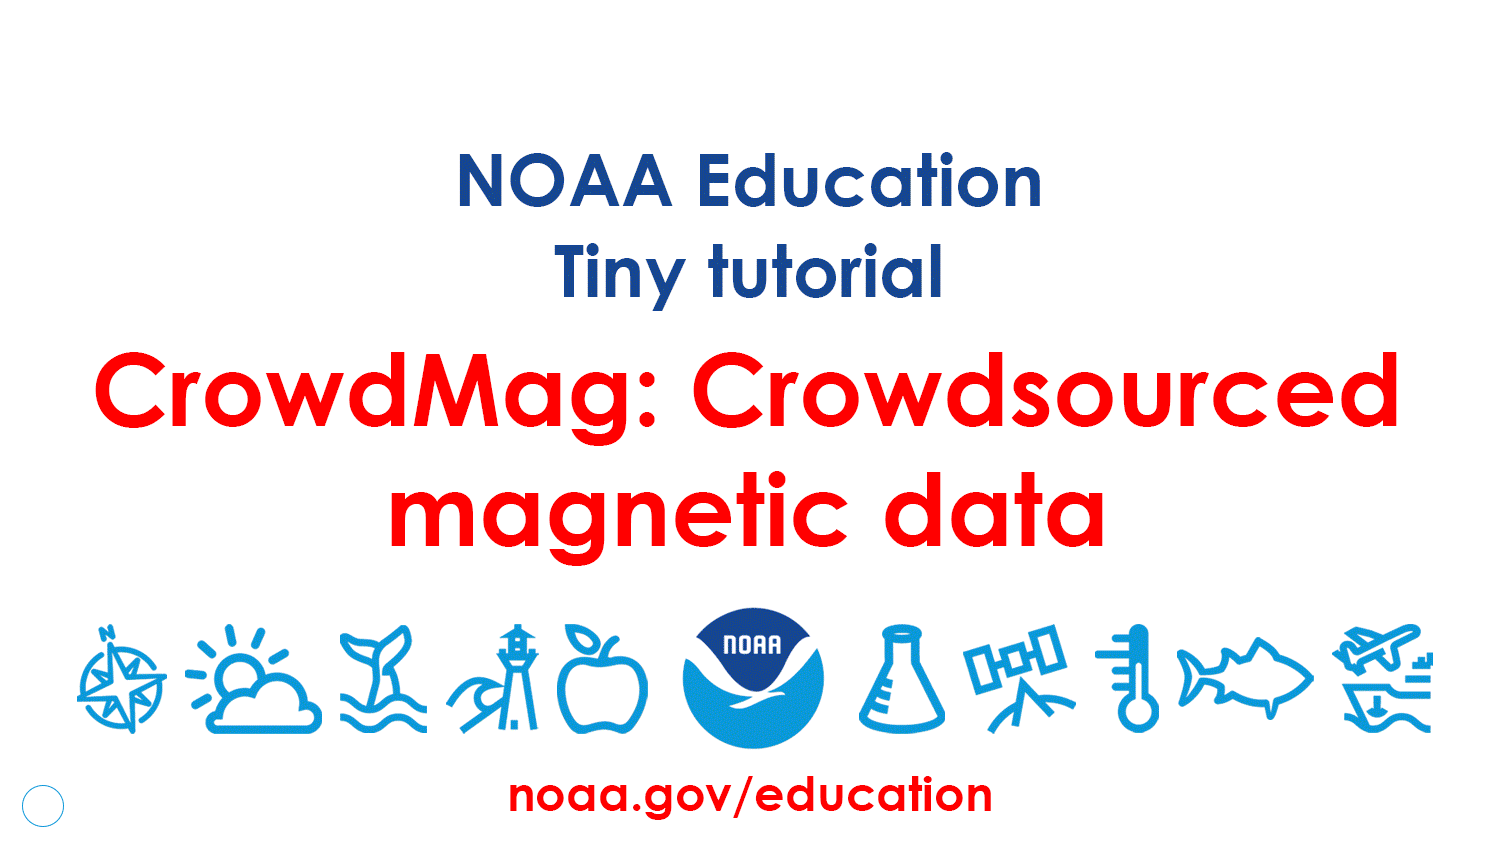 Animated tiny tutorial on using the CrowdMag mobile app from the National Centers for Environmental Information.